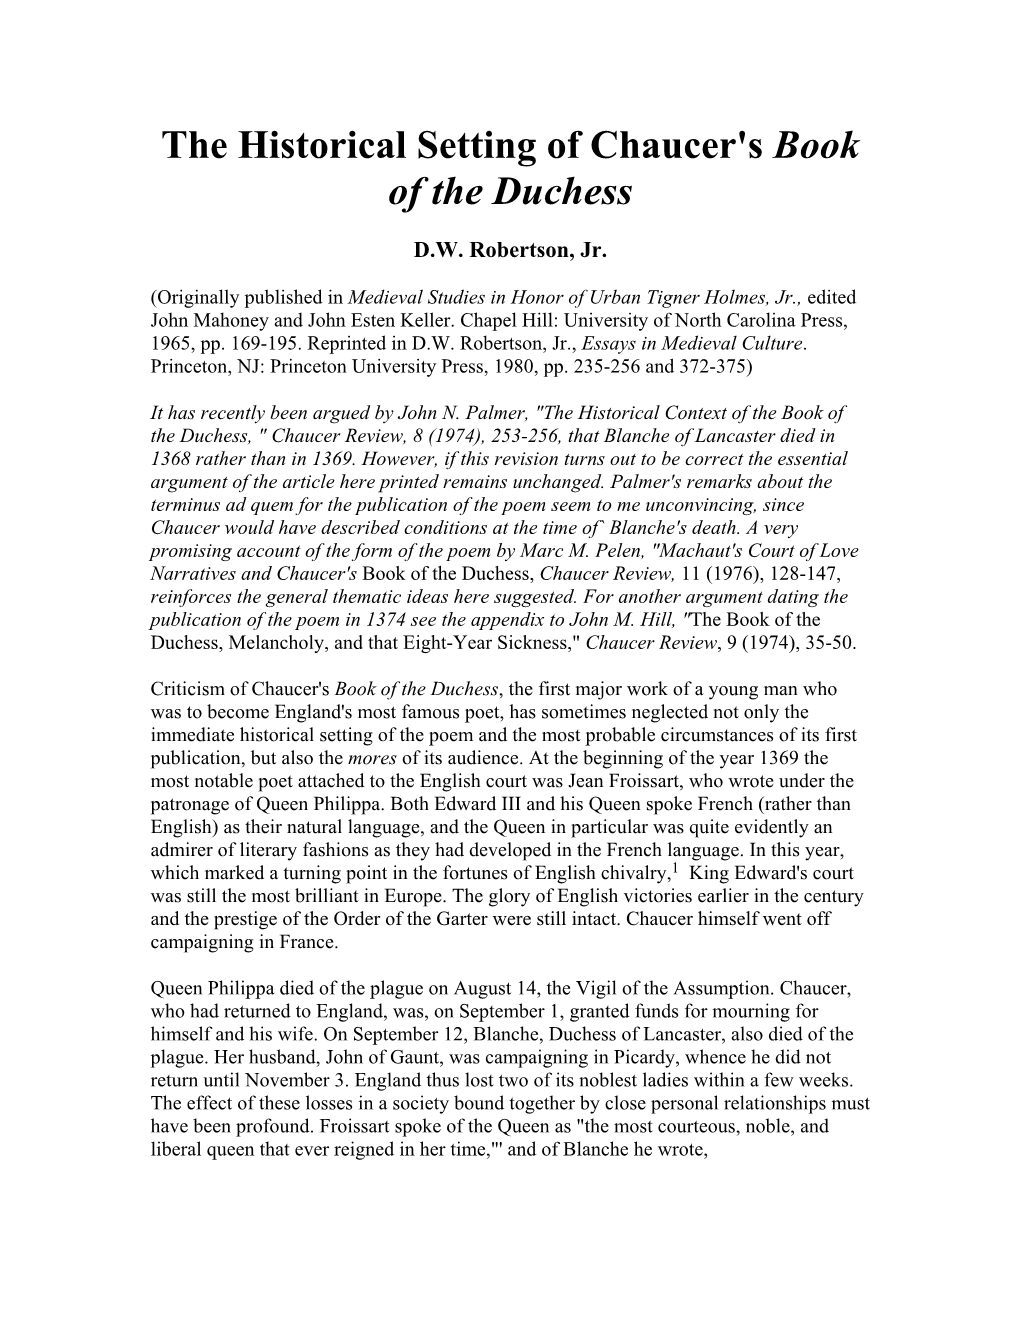 "The Historical Setting of Chaucer's Book of the Duchess", by D.W. Robertson